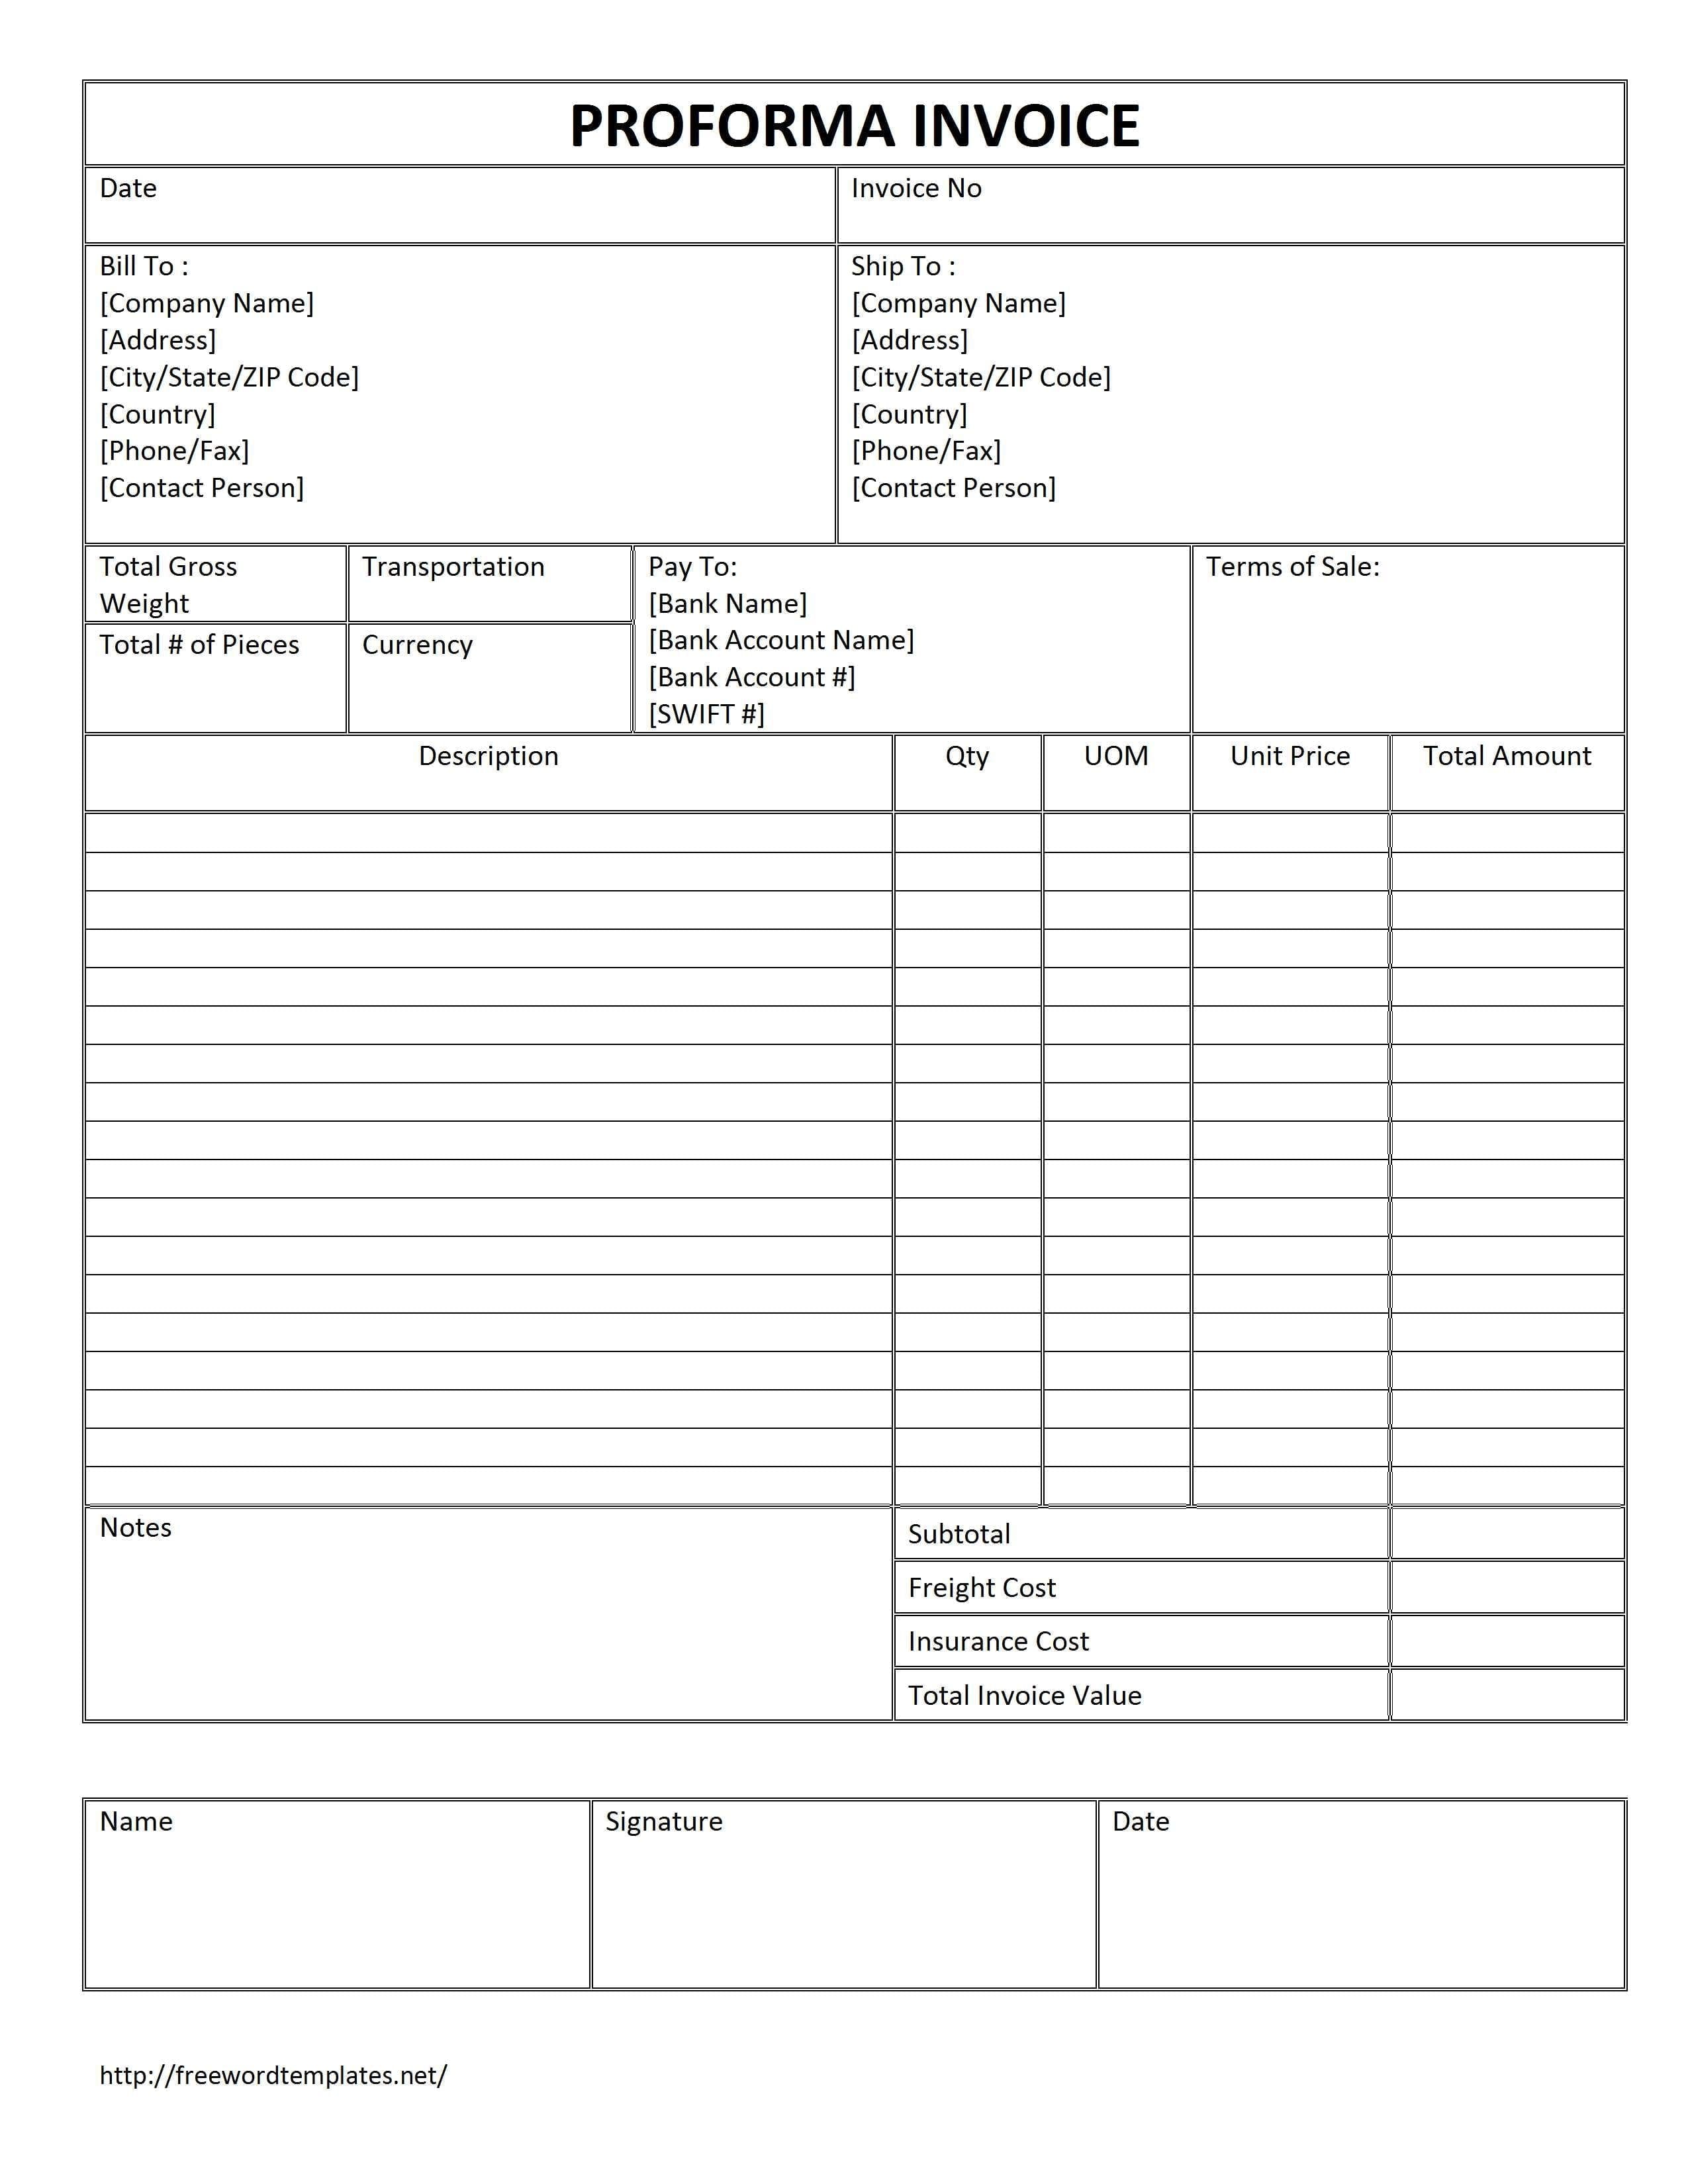 Microsoft Office Invoice Template Excel Excelxo